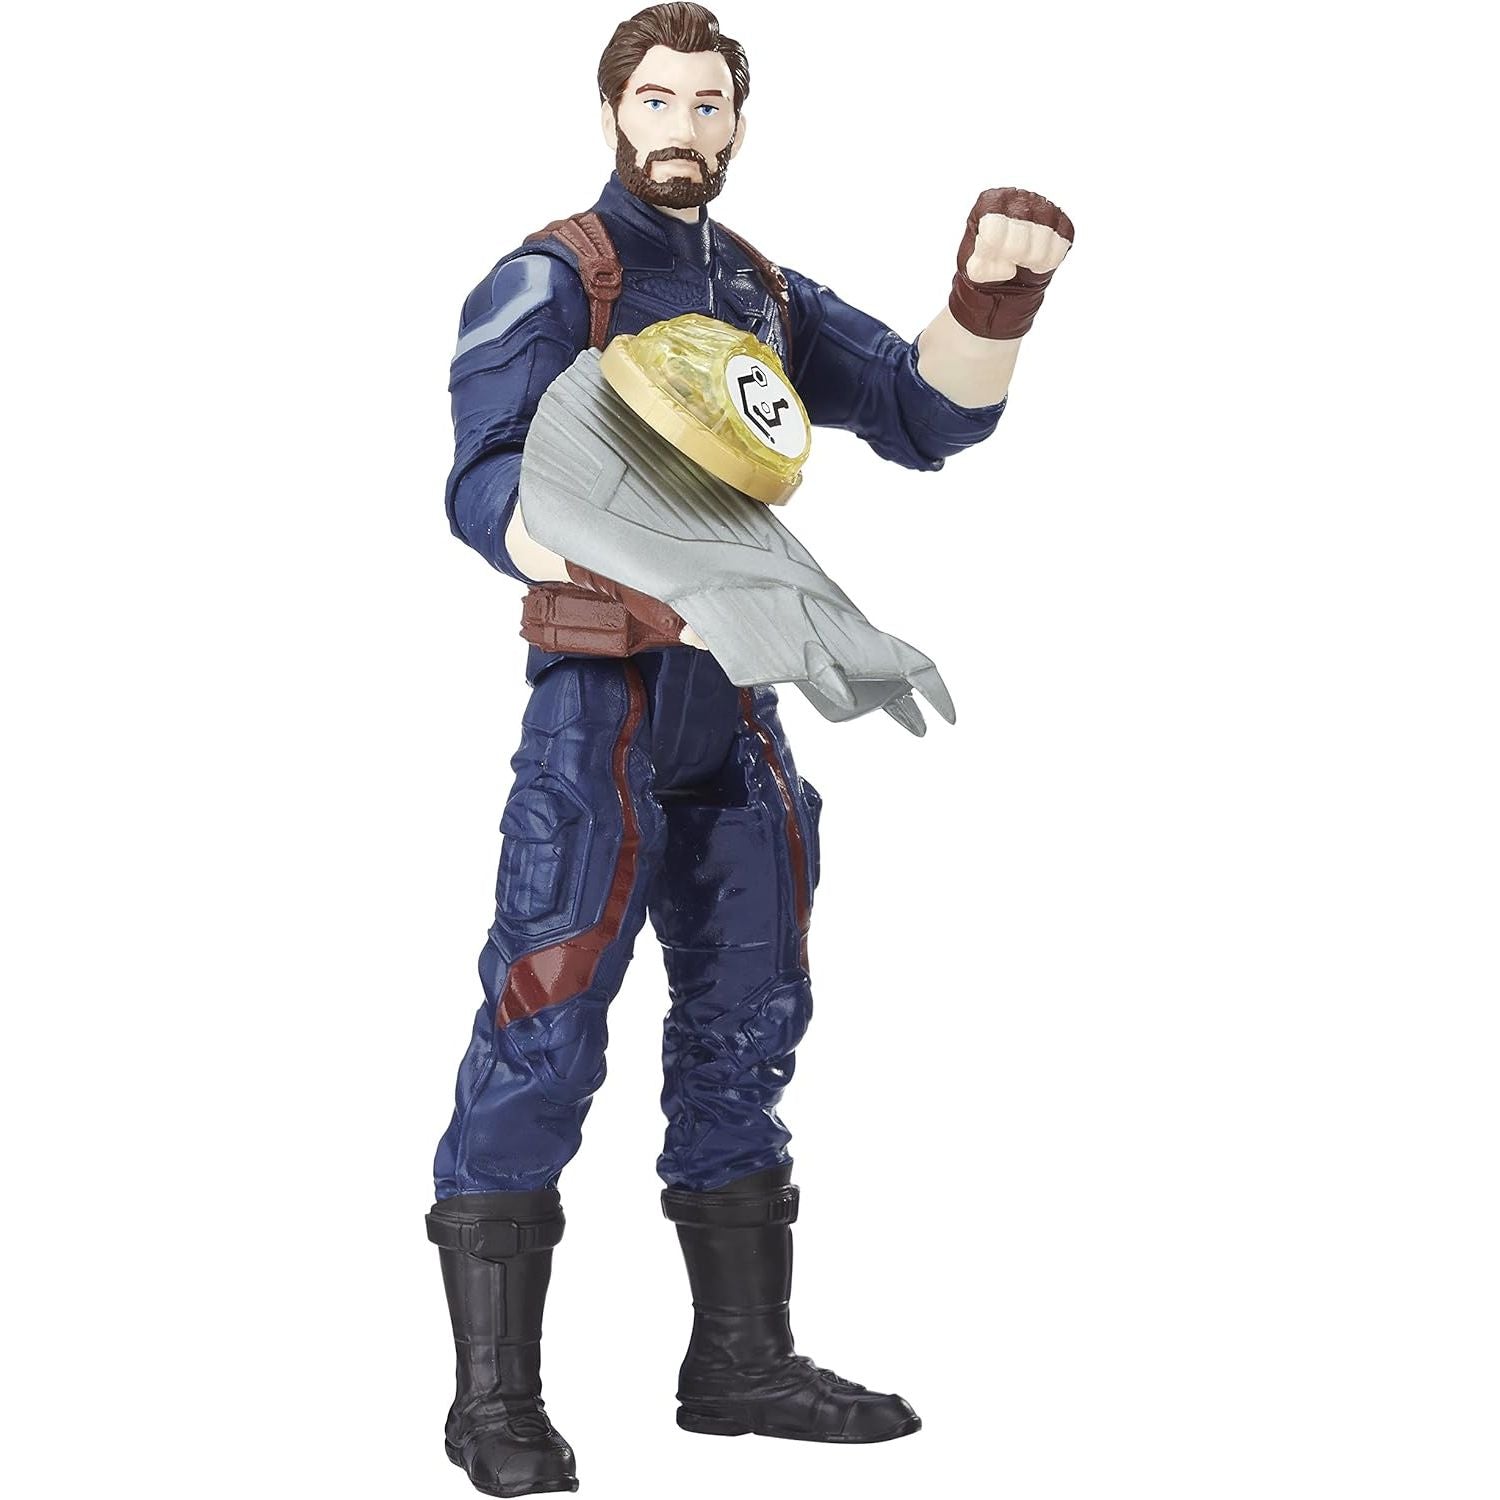 Marvel Avengers Infinity War Captain America with Infinity Stone